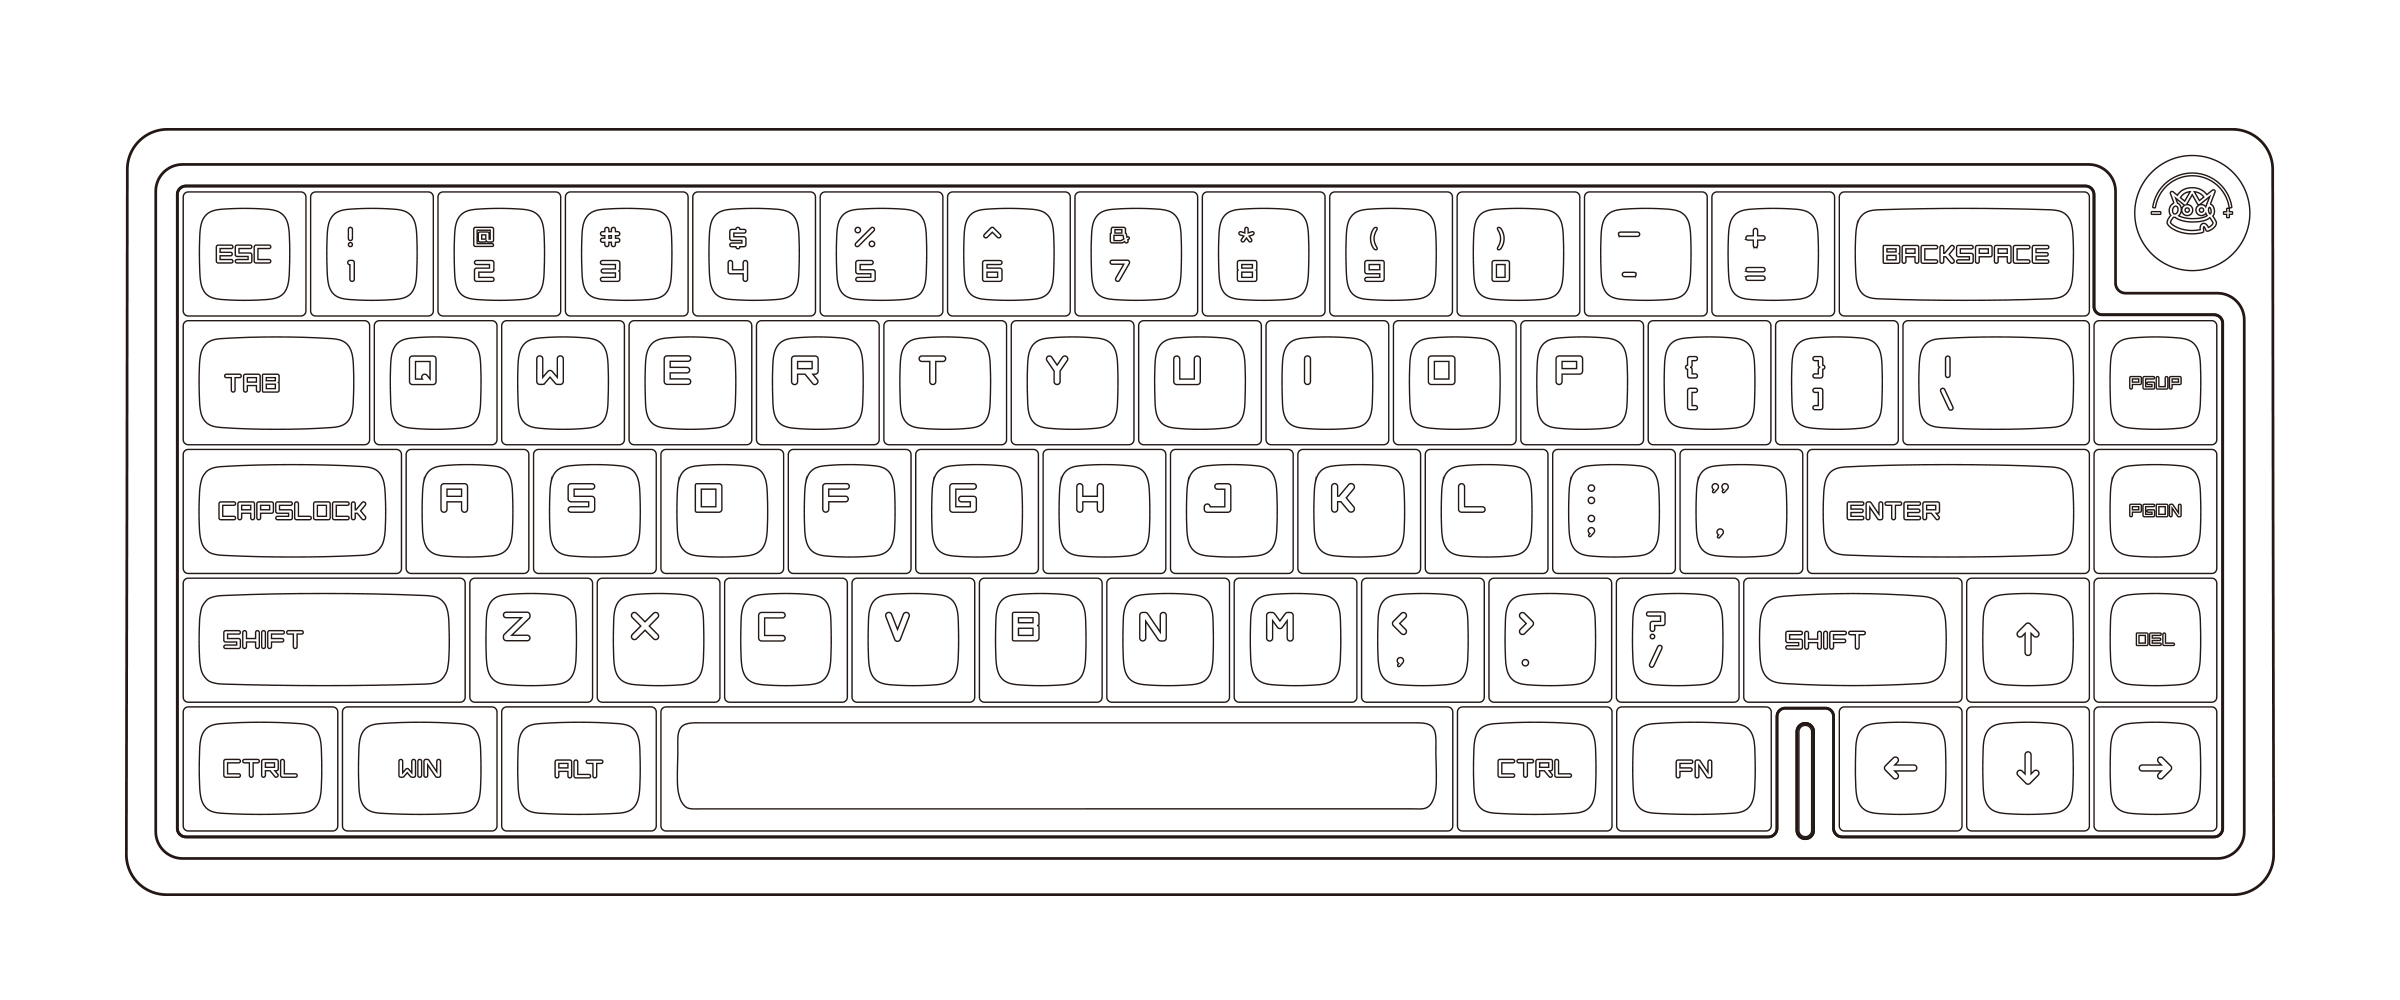 Computing keyboard icons dark bright realistic sketch Vectors graphic art  designs in editable ai eps svg cdr format free and easy download  unlimit id294470